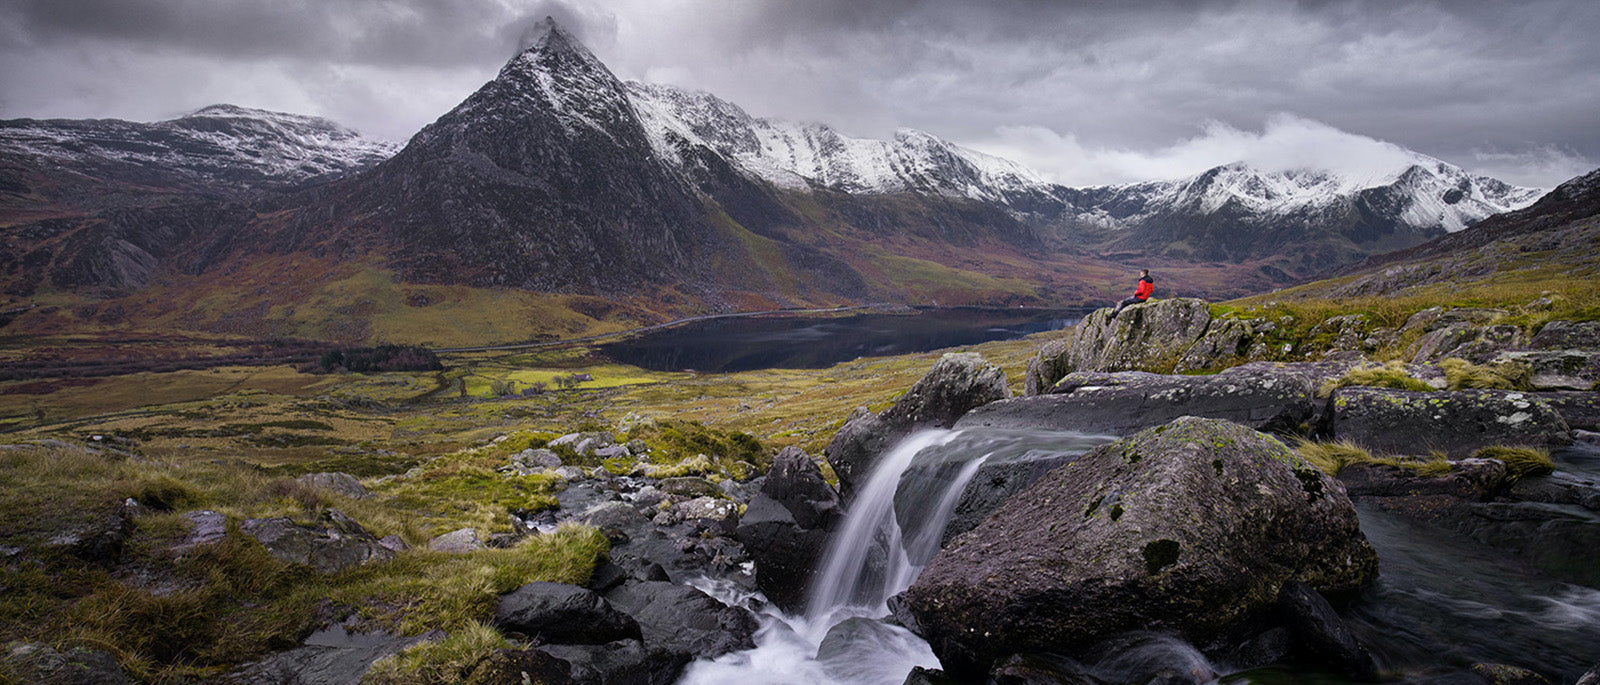 The Ogwen Valley, Snowdonia, North Wales